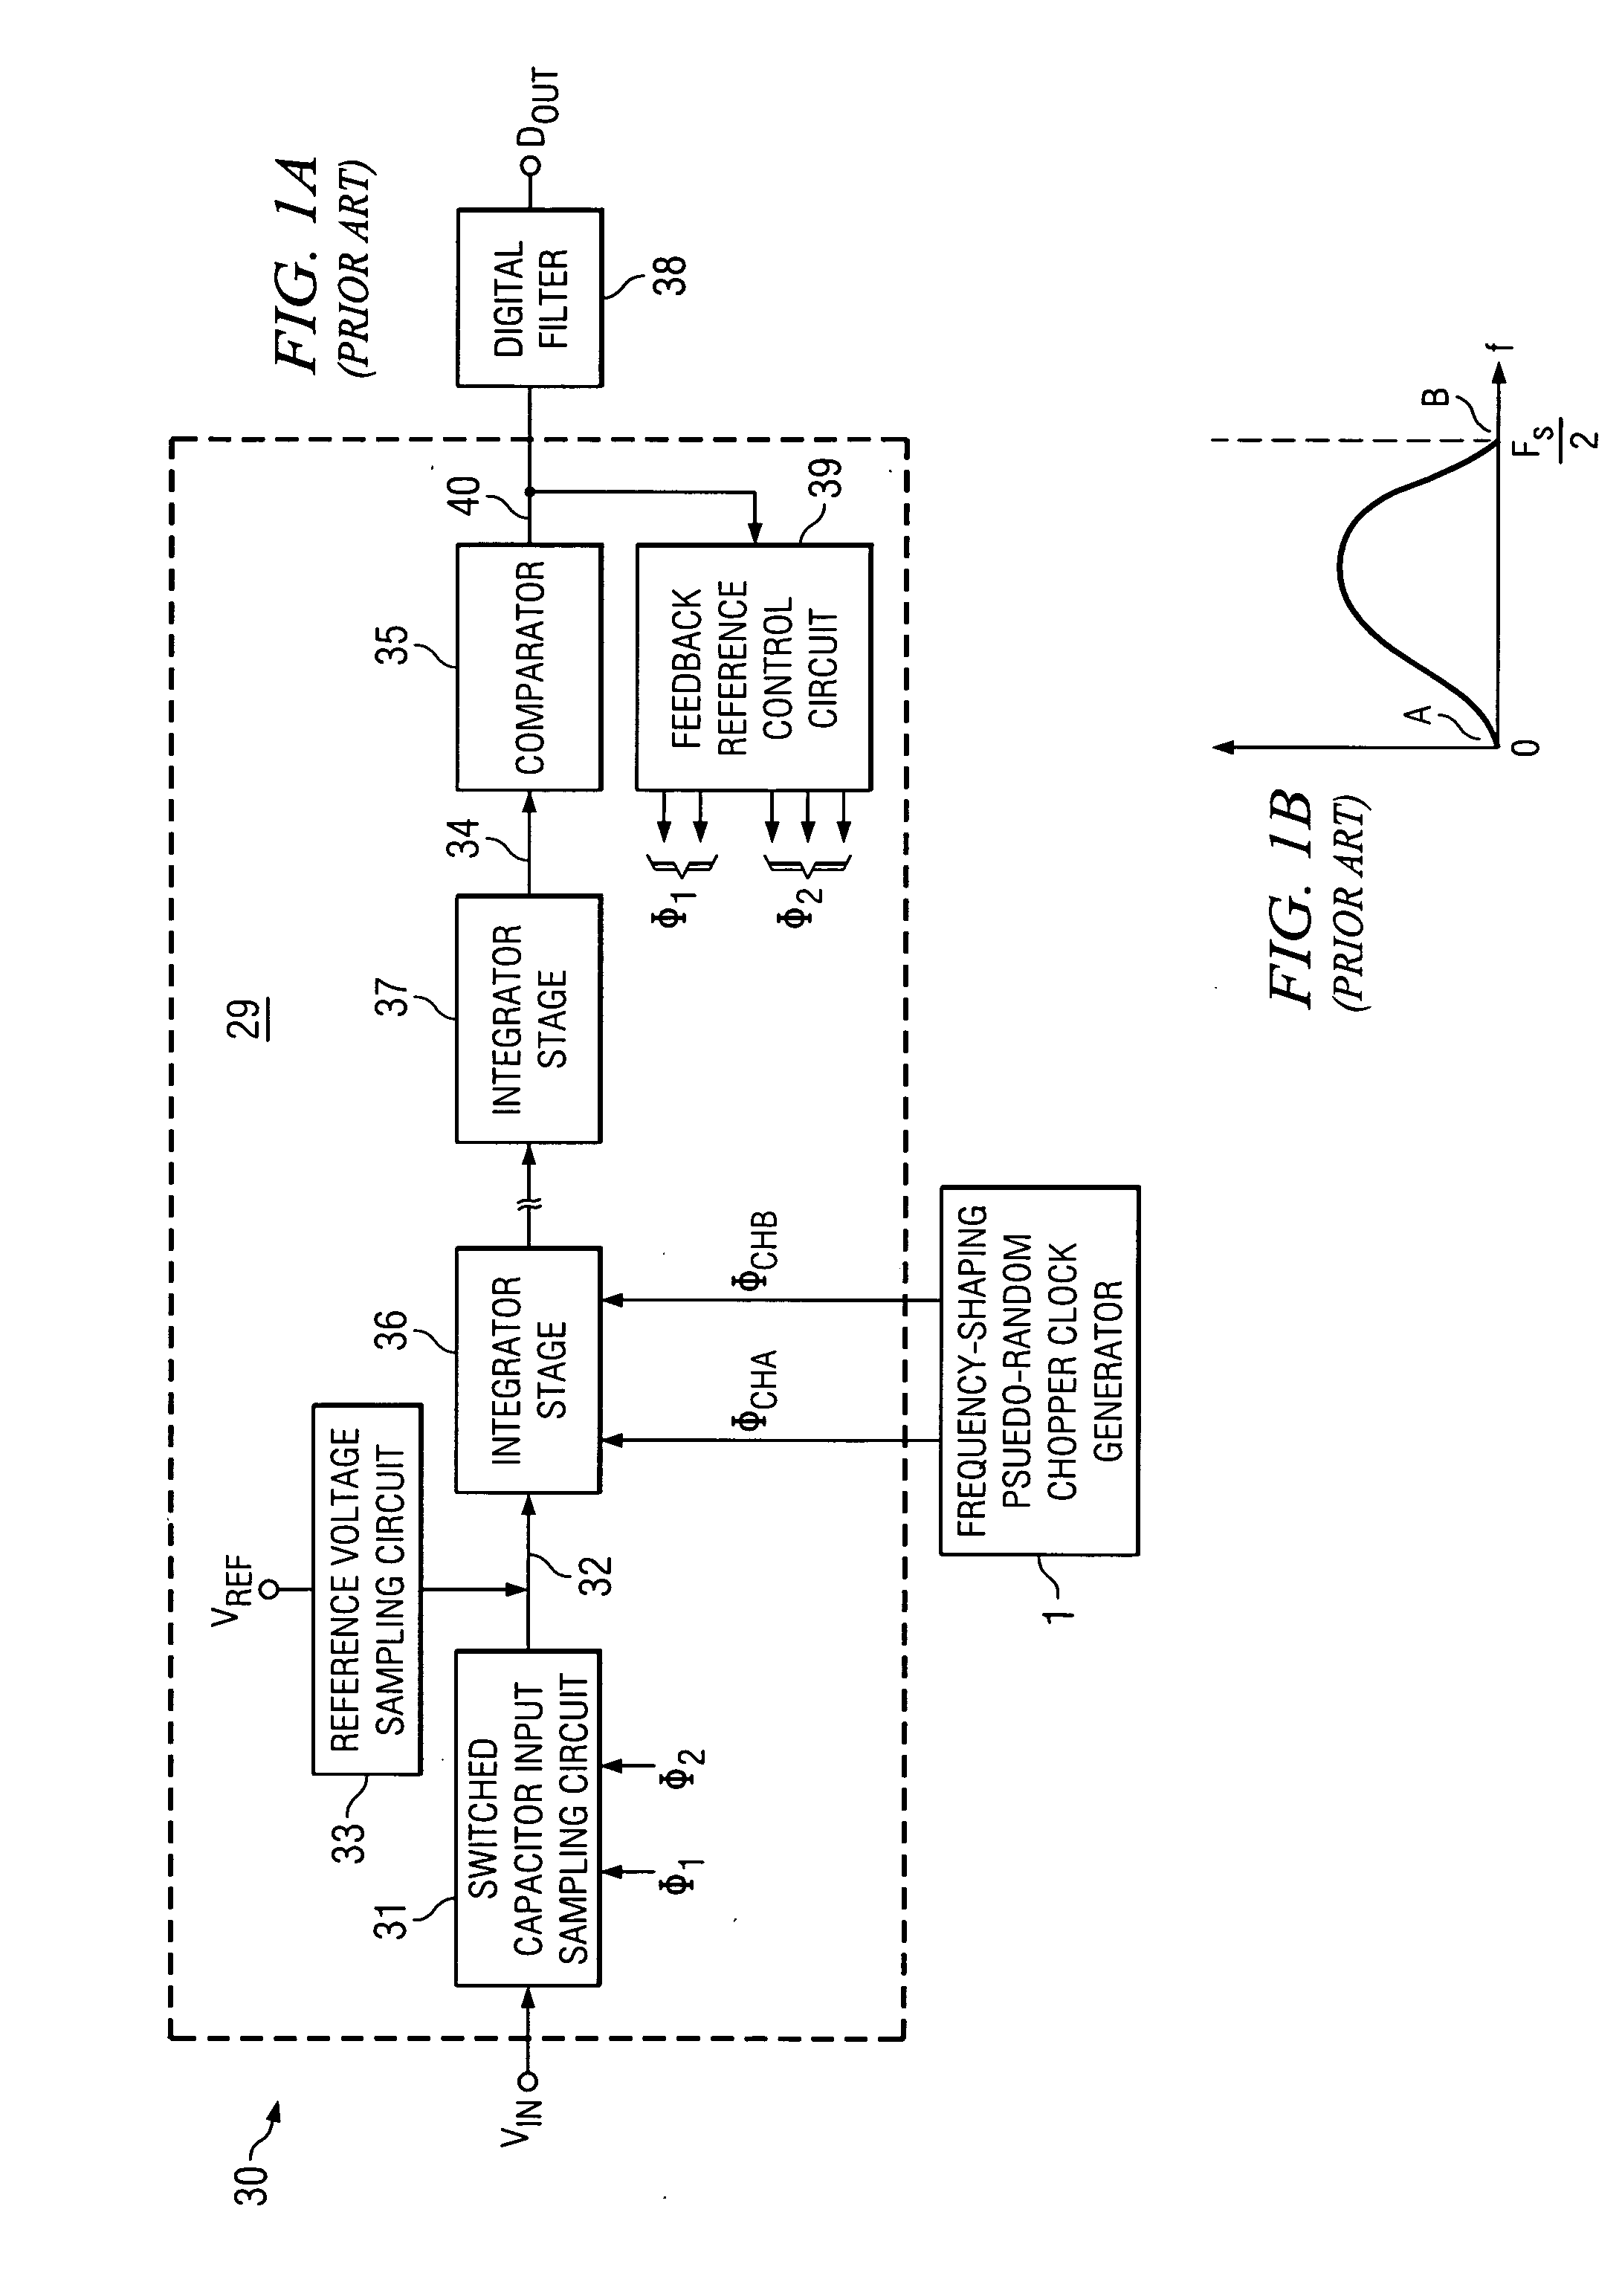 Oversampling analog-to-digital converter and method with reduced chopping residue noise